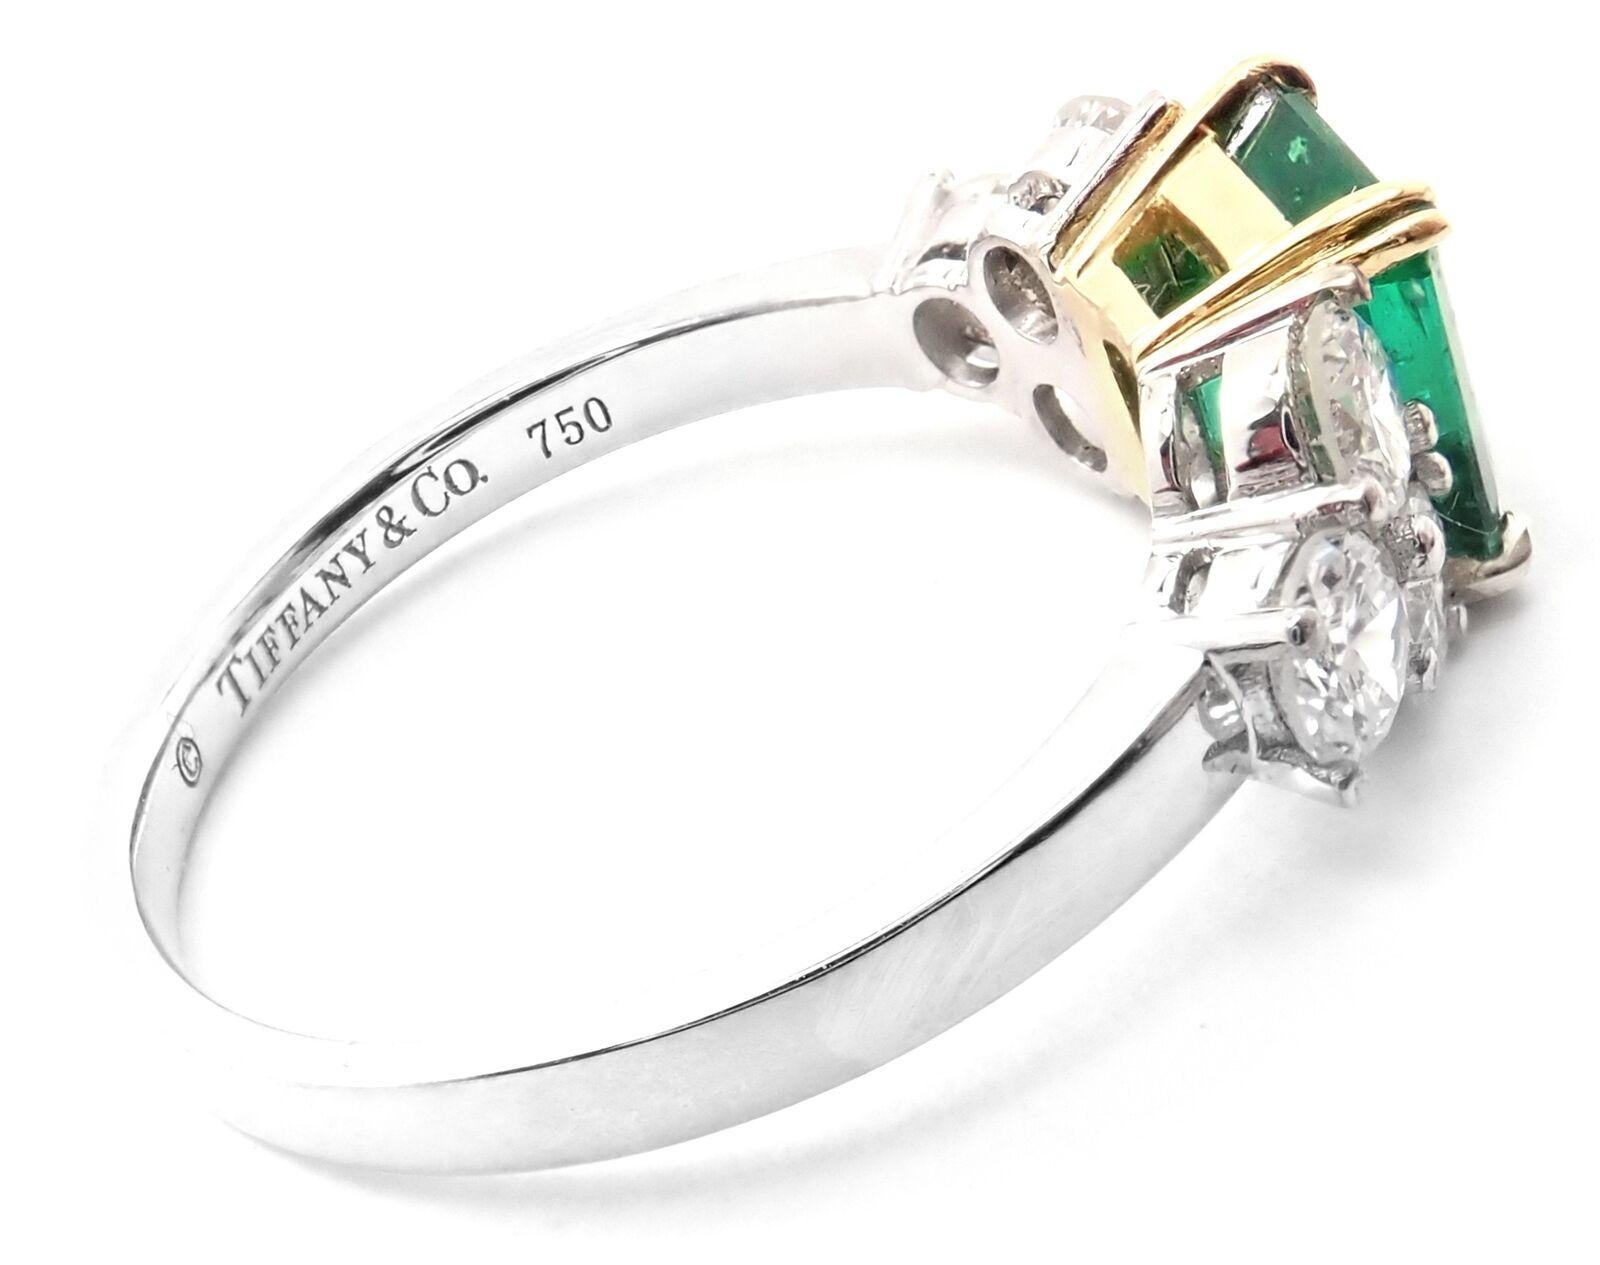 18k White & Yellow Gold Diamond Emerald Cocktail Ring.
With 6 Round Brilliant Cut Diamond VS1 clarity, G color, Total weight Approx .72ctw
1 emerald cut emerald approximately 2ct
Measurements:
Ring Size: 7 3/4
Weight:  4 grams
Width at Top: